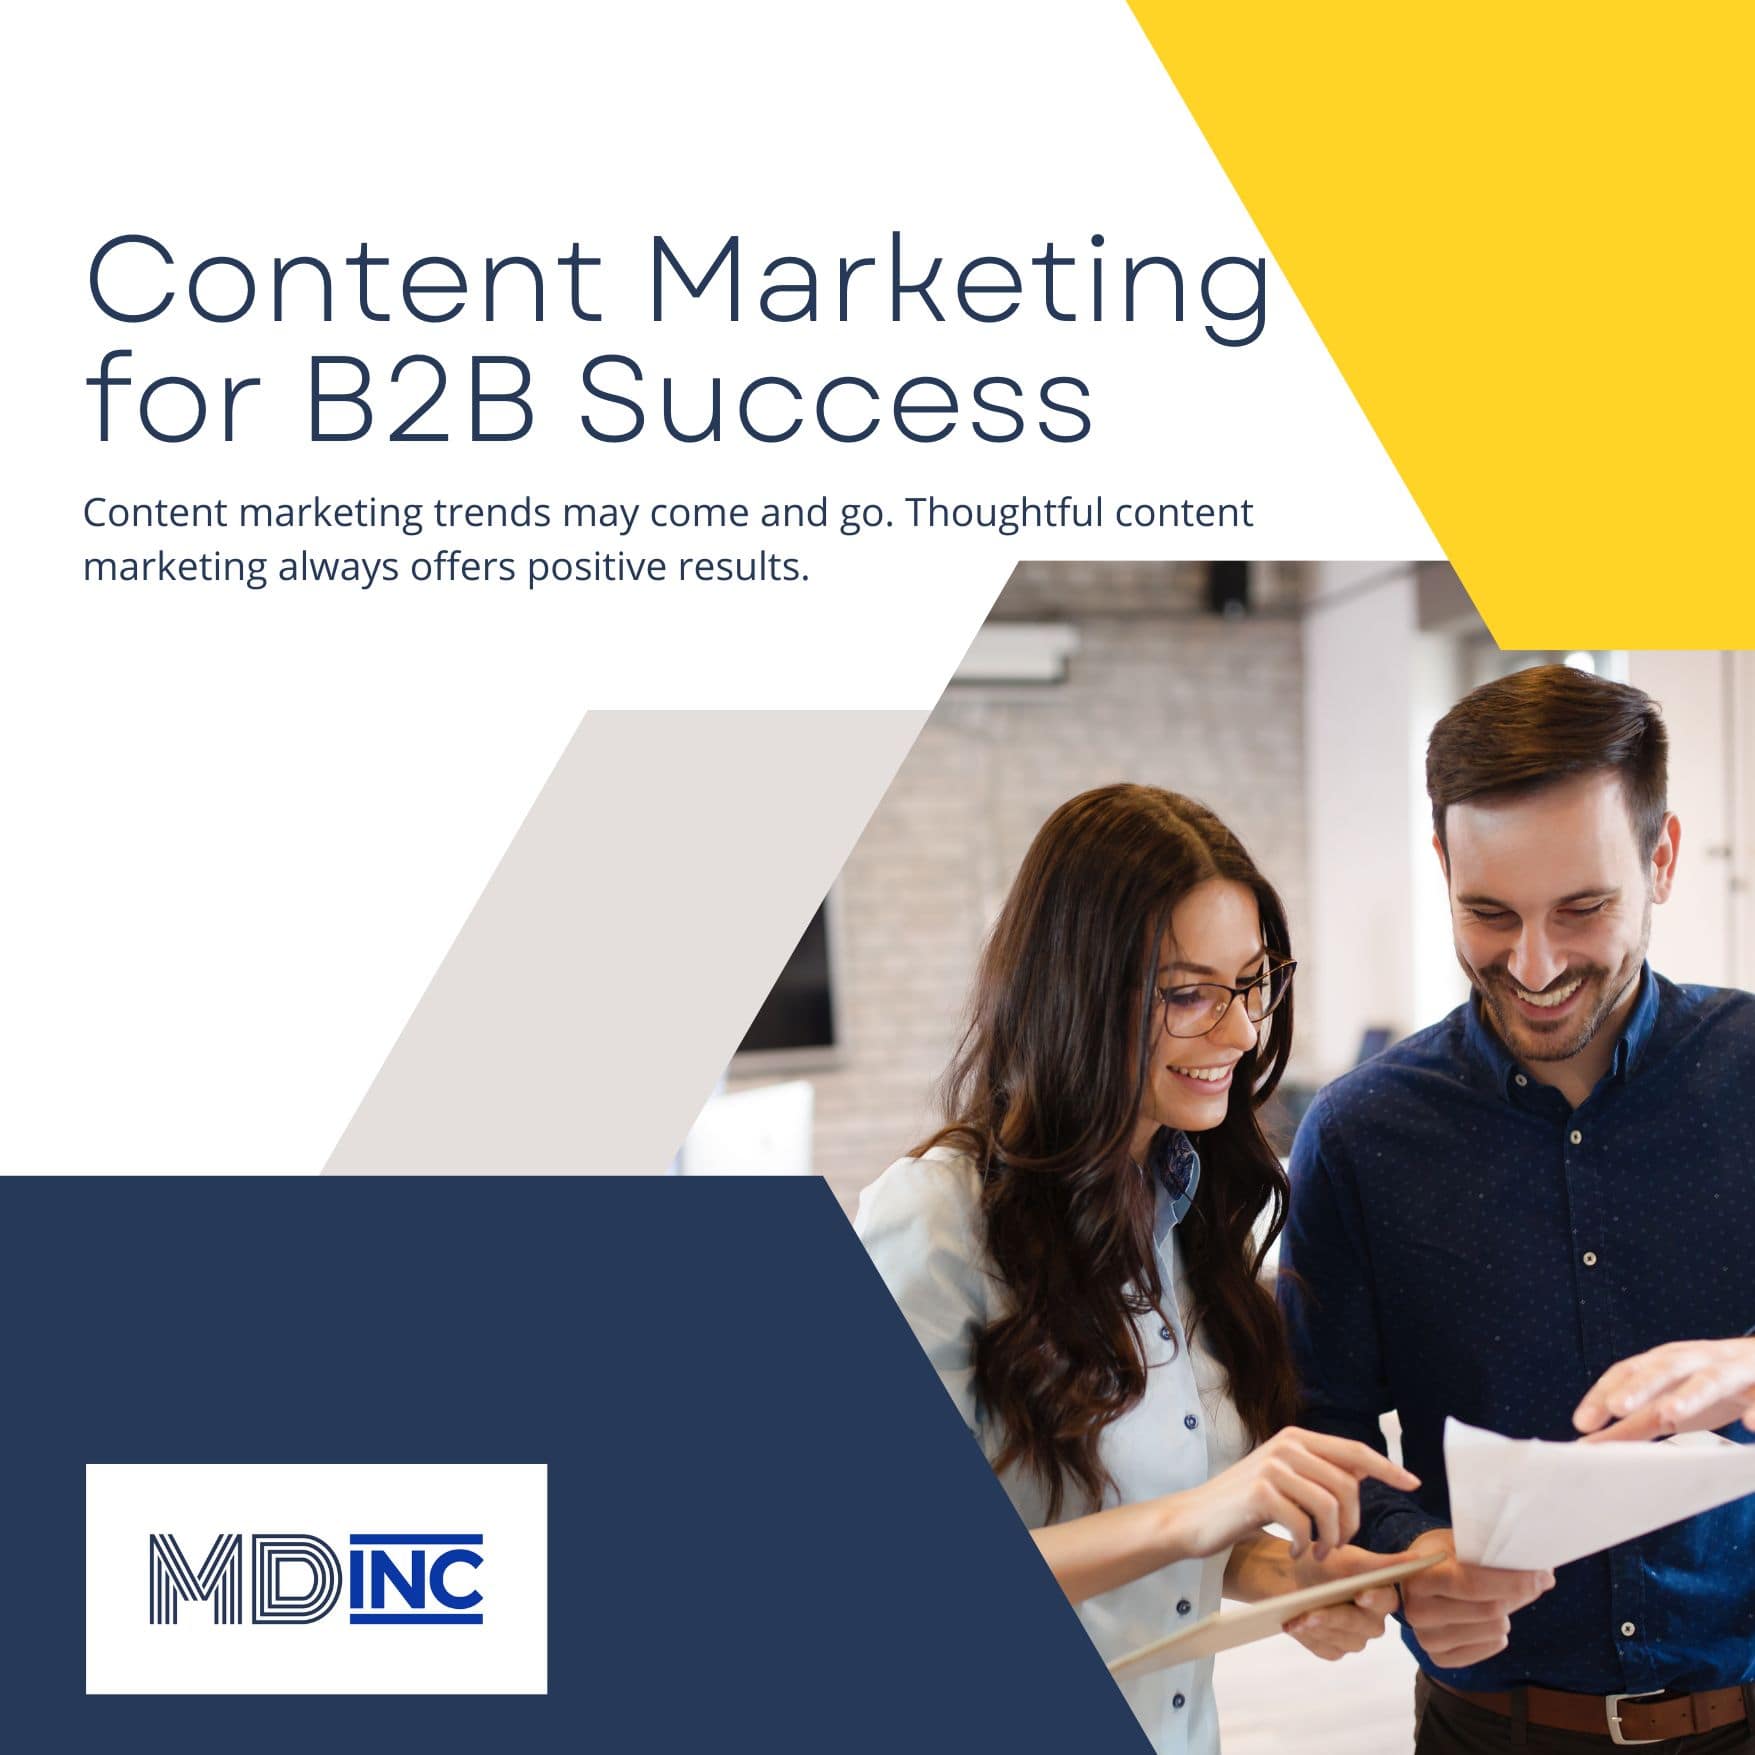 Image of two people smiling over a computer with text overlay explaining the title "Content Marketing for B2B success" and a snippet empowering the reader to make successful decisions.